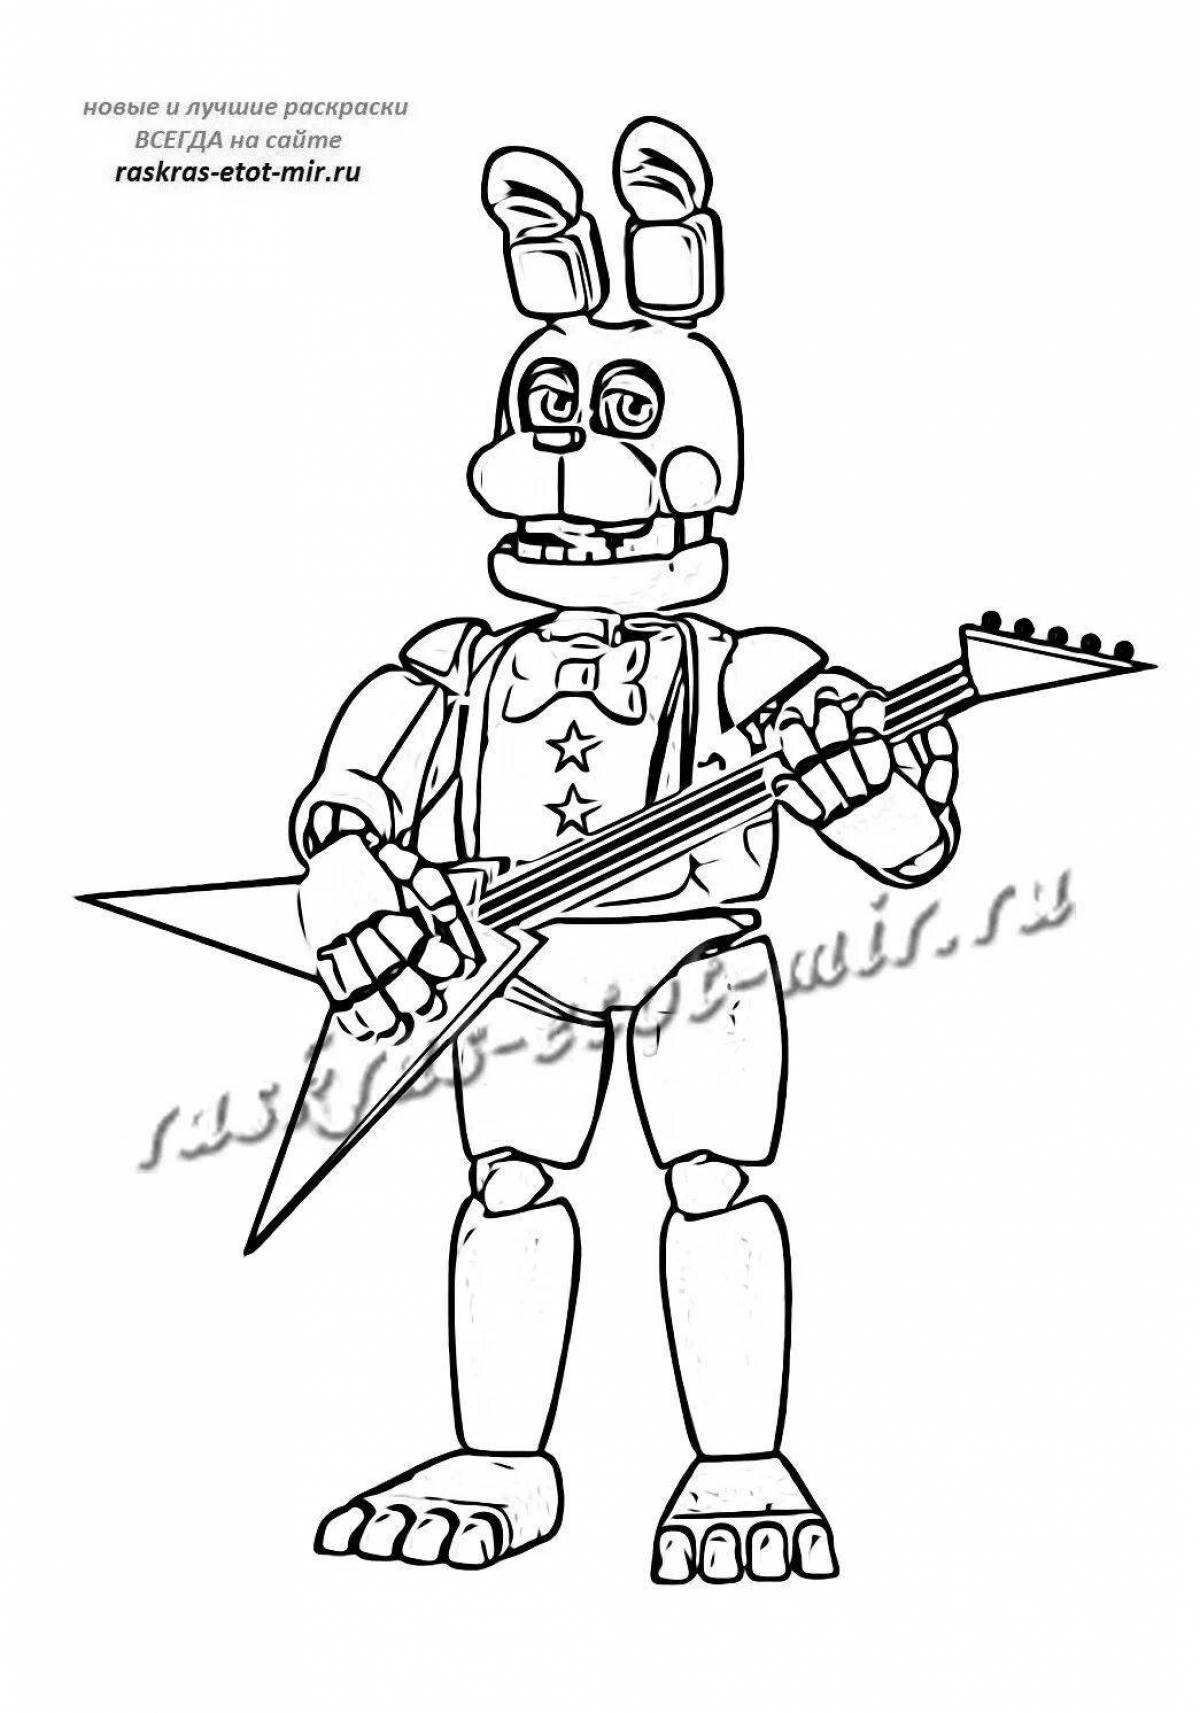 Bright bonnie from freddy's coloring book